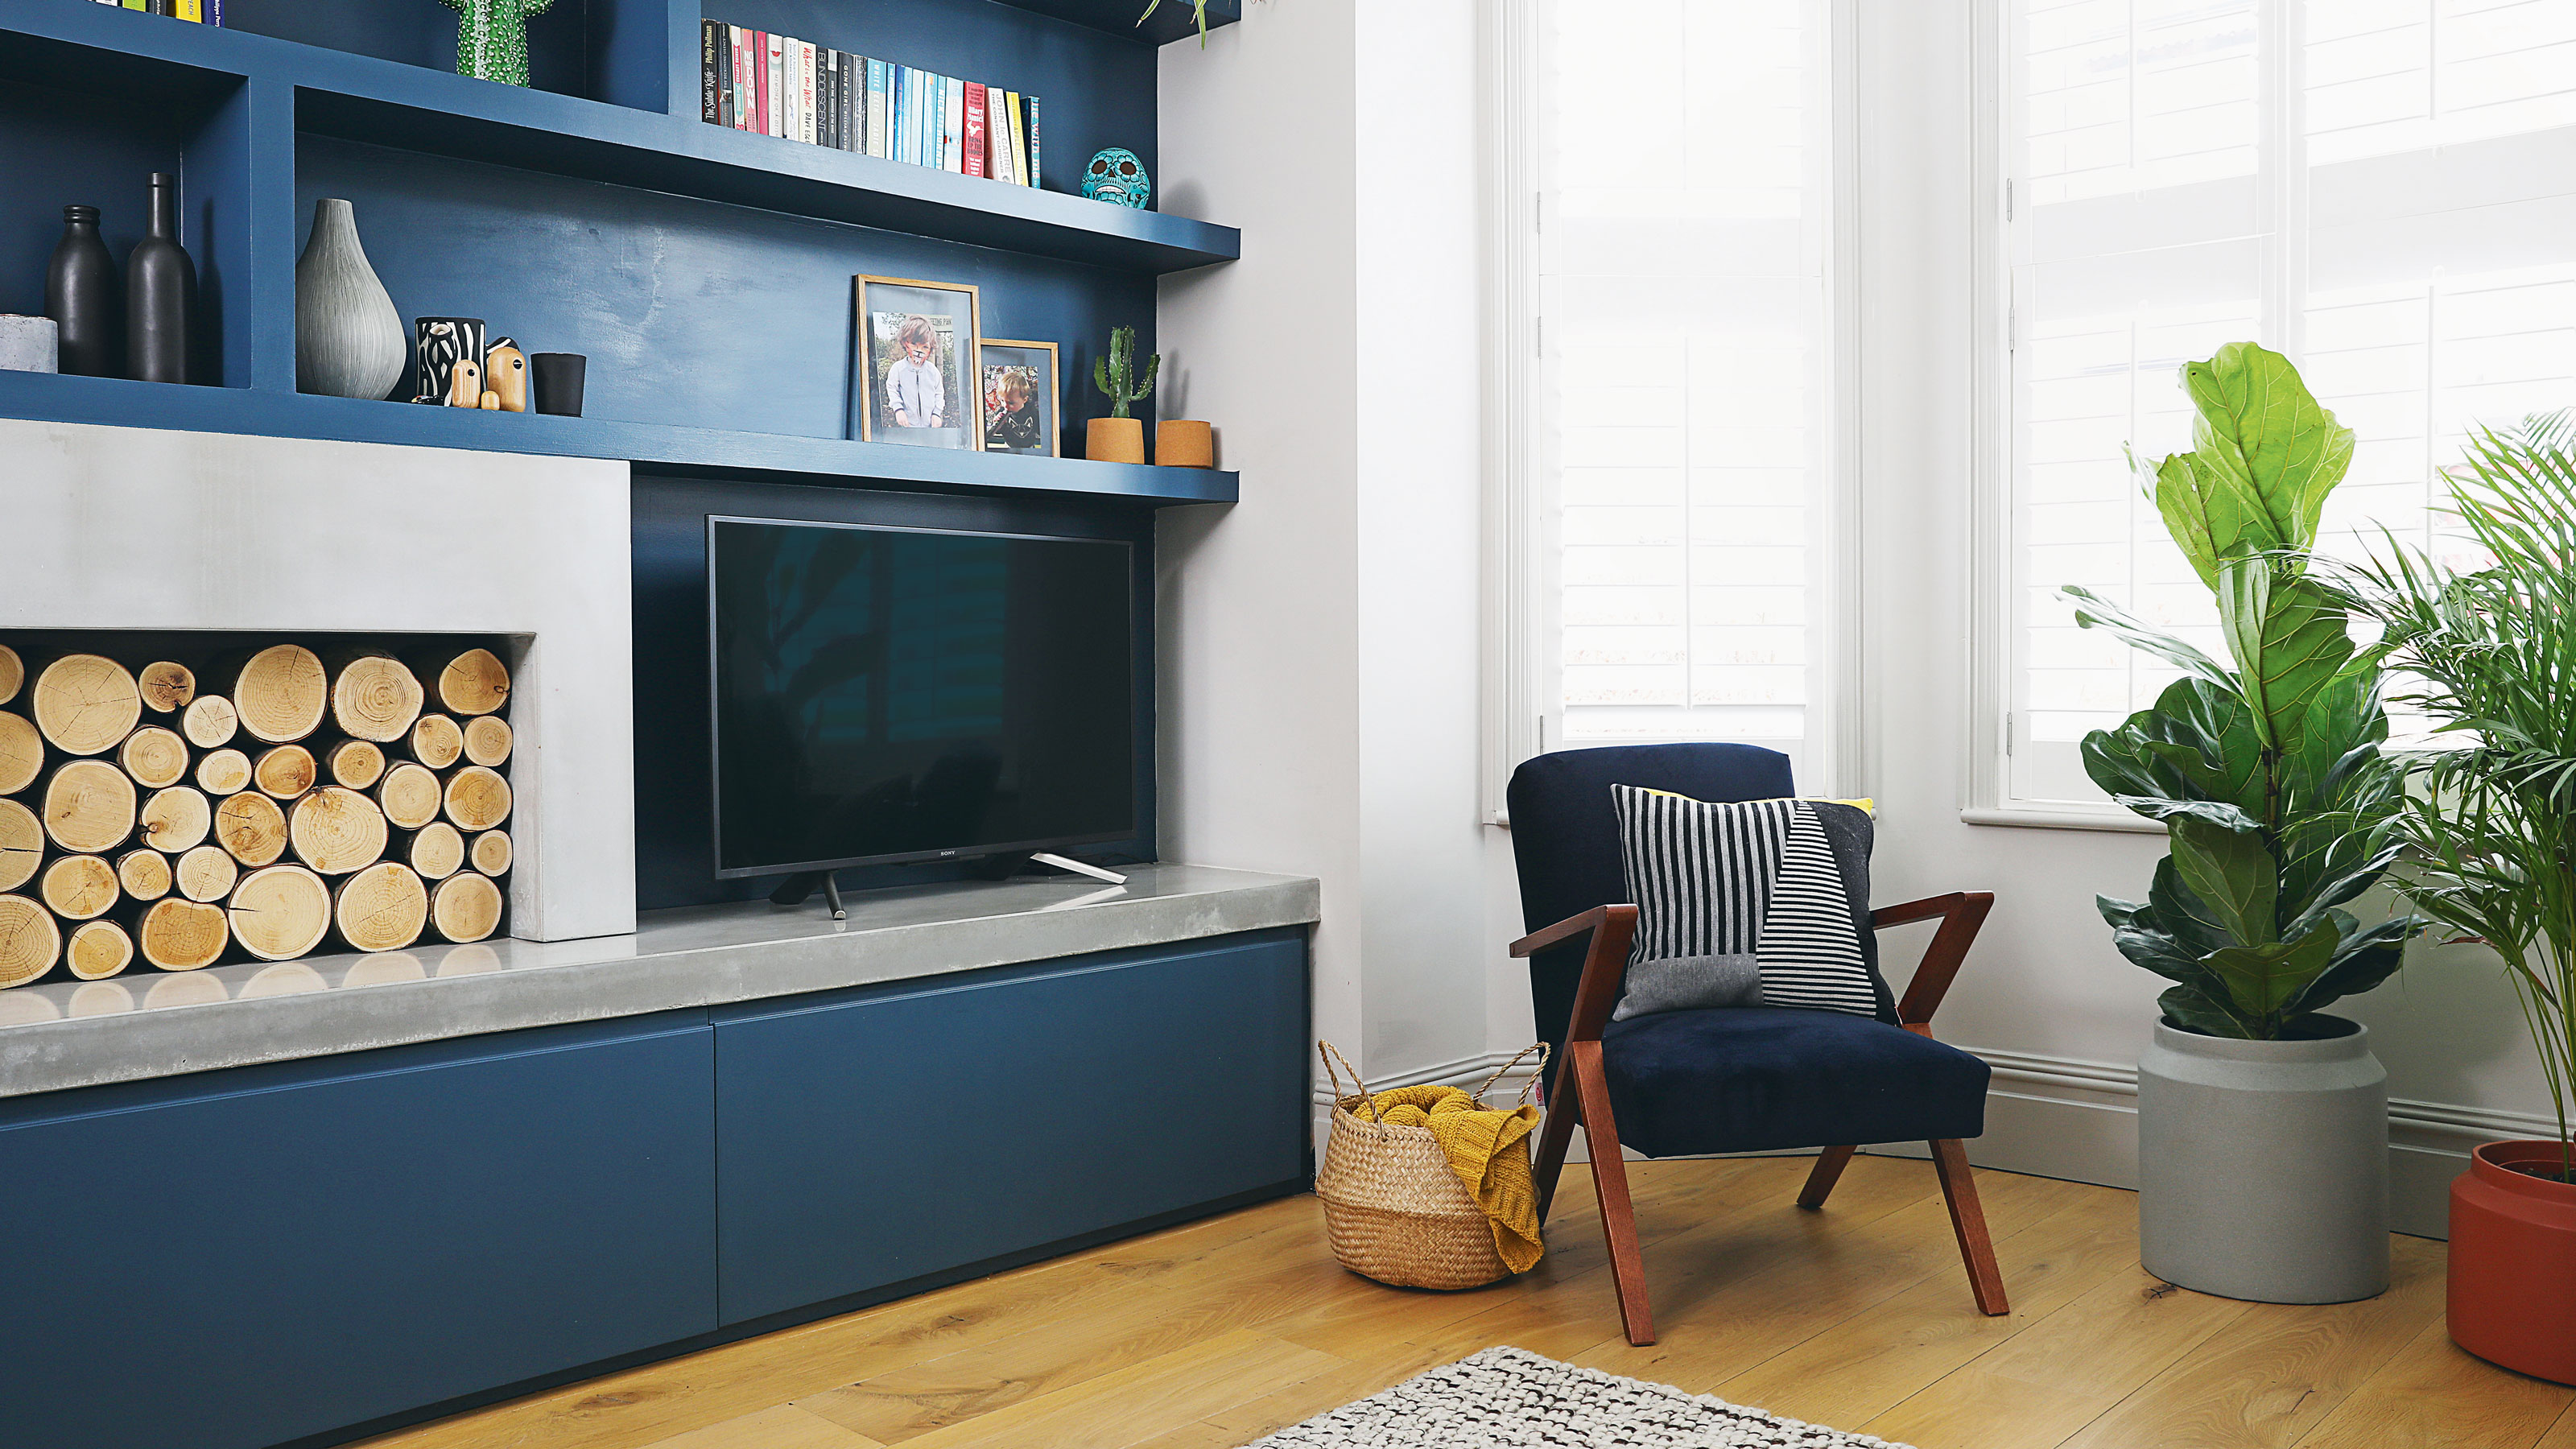 5 Clever Ways to Hide TV Cords